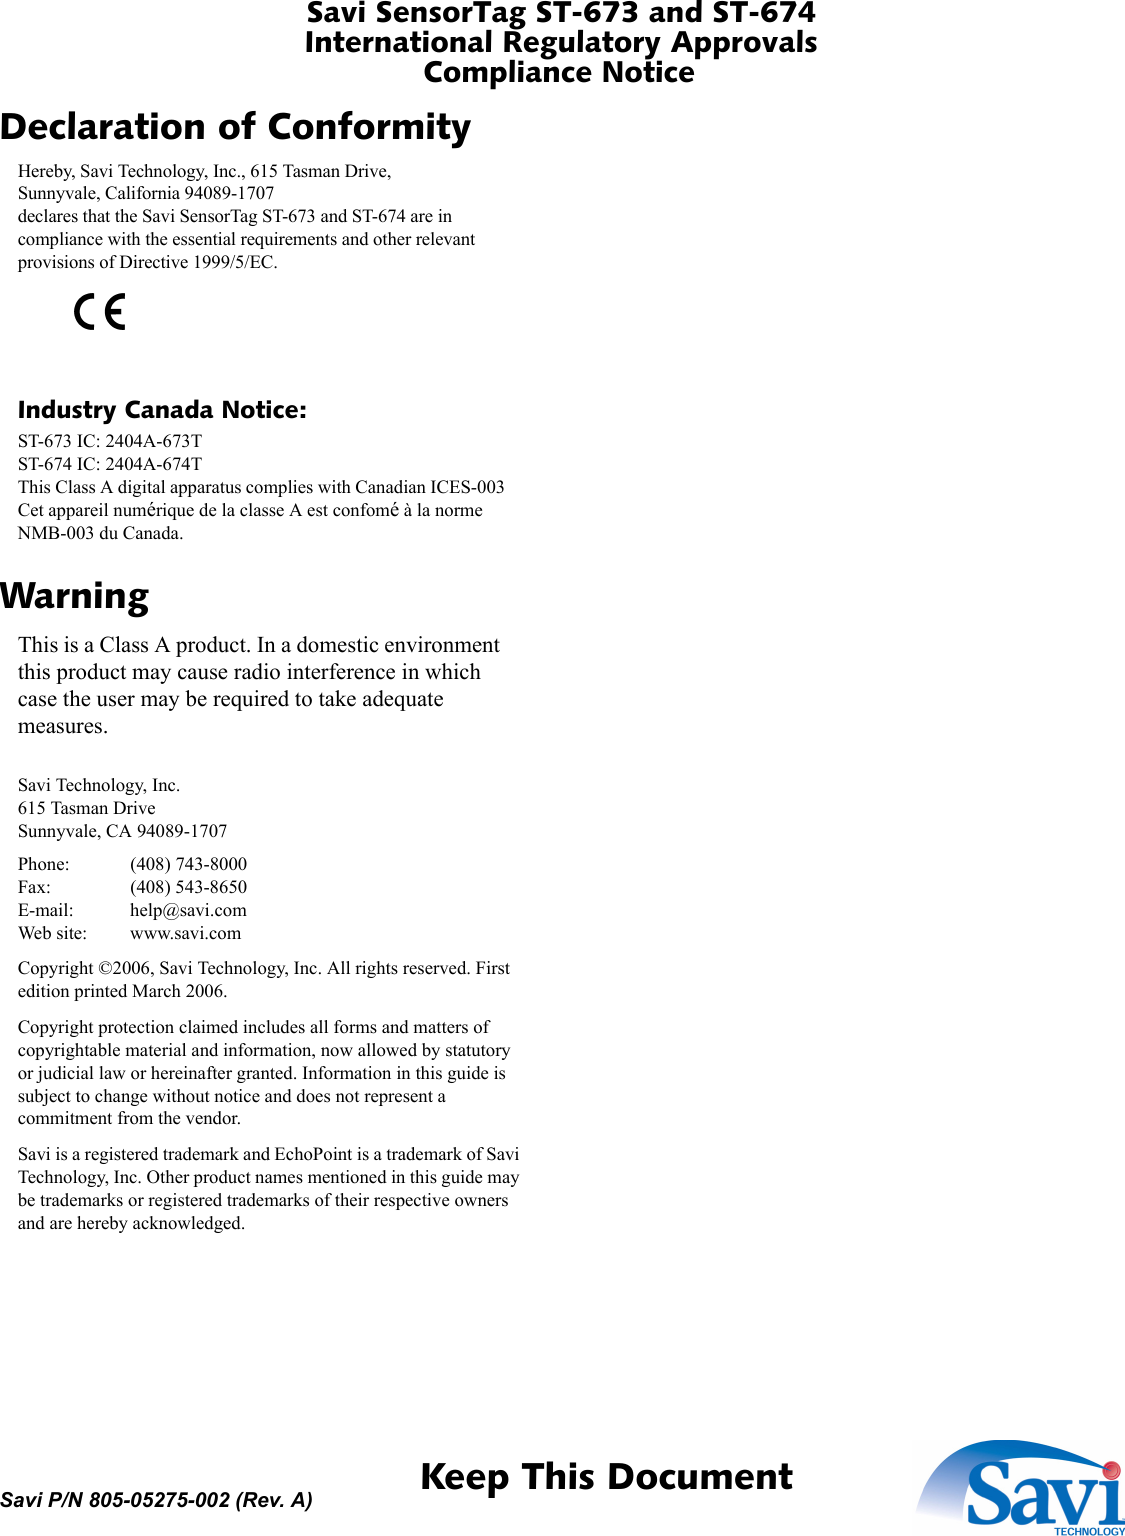 Savi SensorTag ST-673 and ST-674International Regulatory ApprovalsCompliance Notice 1  Keep This DocumentSavi P/N 805-05275-002 (Rev. A)Declaration of ConformityHereby, Savi Technology, Inc., 615 Tasman Drive,Sunnyvale, California 94089-1707declares that the Savi SensorTag ST-673 and ST-674 are in compliance with the essential requirements and other relevant provisions of Directive 1999/5/EC.Industry Canada Notice:ST-673 IC: 2404A-673TST-674 IC: 2404A-674TThis Class A digital apparatus complies with Canadian ICES-003Cet appareil numérique de la classe A est confomé à la norme NMB-003 du Canada.WarningThis is a Class A product. In a domestic environment this product may cause radio interference in which case the user may be required to take adequate measures.Savi Technology, Inc.615 Tasman DriveSunnyvale, CA 94089-1707Phone: (408) 743-8000Fax: (408) 543-8650E-mail: help@savi.comWeb site: www.savi.comCopyright ©2006, Savi Technology, Inc. All rights reserved. First edition printed March 2006.Copyright protection claimed includes all forms and matters of copyrightable material and information, now allowed by statutory or judicial law or hereinafter granted. Information in this guide is subject to change without notice and does not represent a commitment from the vendor.Savi is a registered trademark and EchoPoint is a trademark of Savi Technology, Inc. Other product names mentioned in this guide may be trademarks or registered trademarks of their respective owners and are hereby acknowledged.